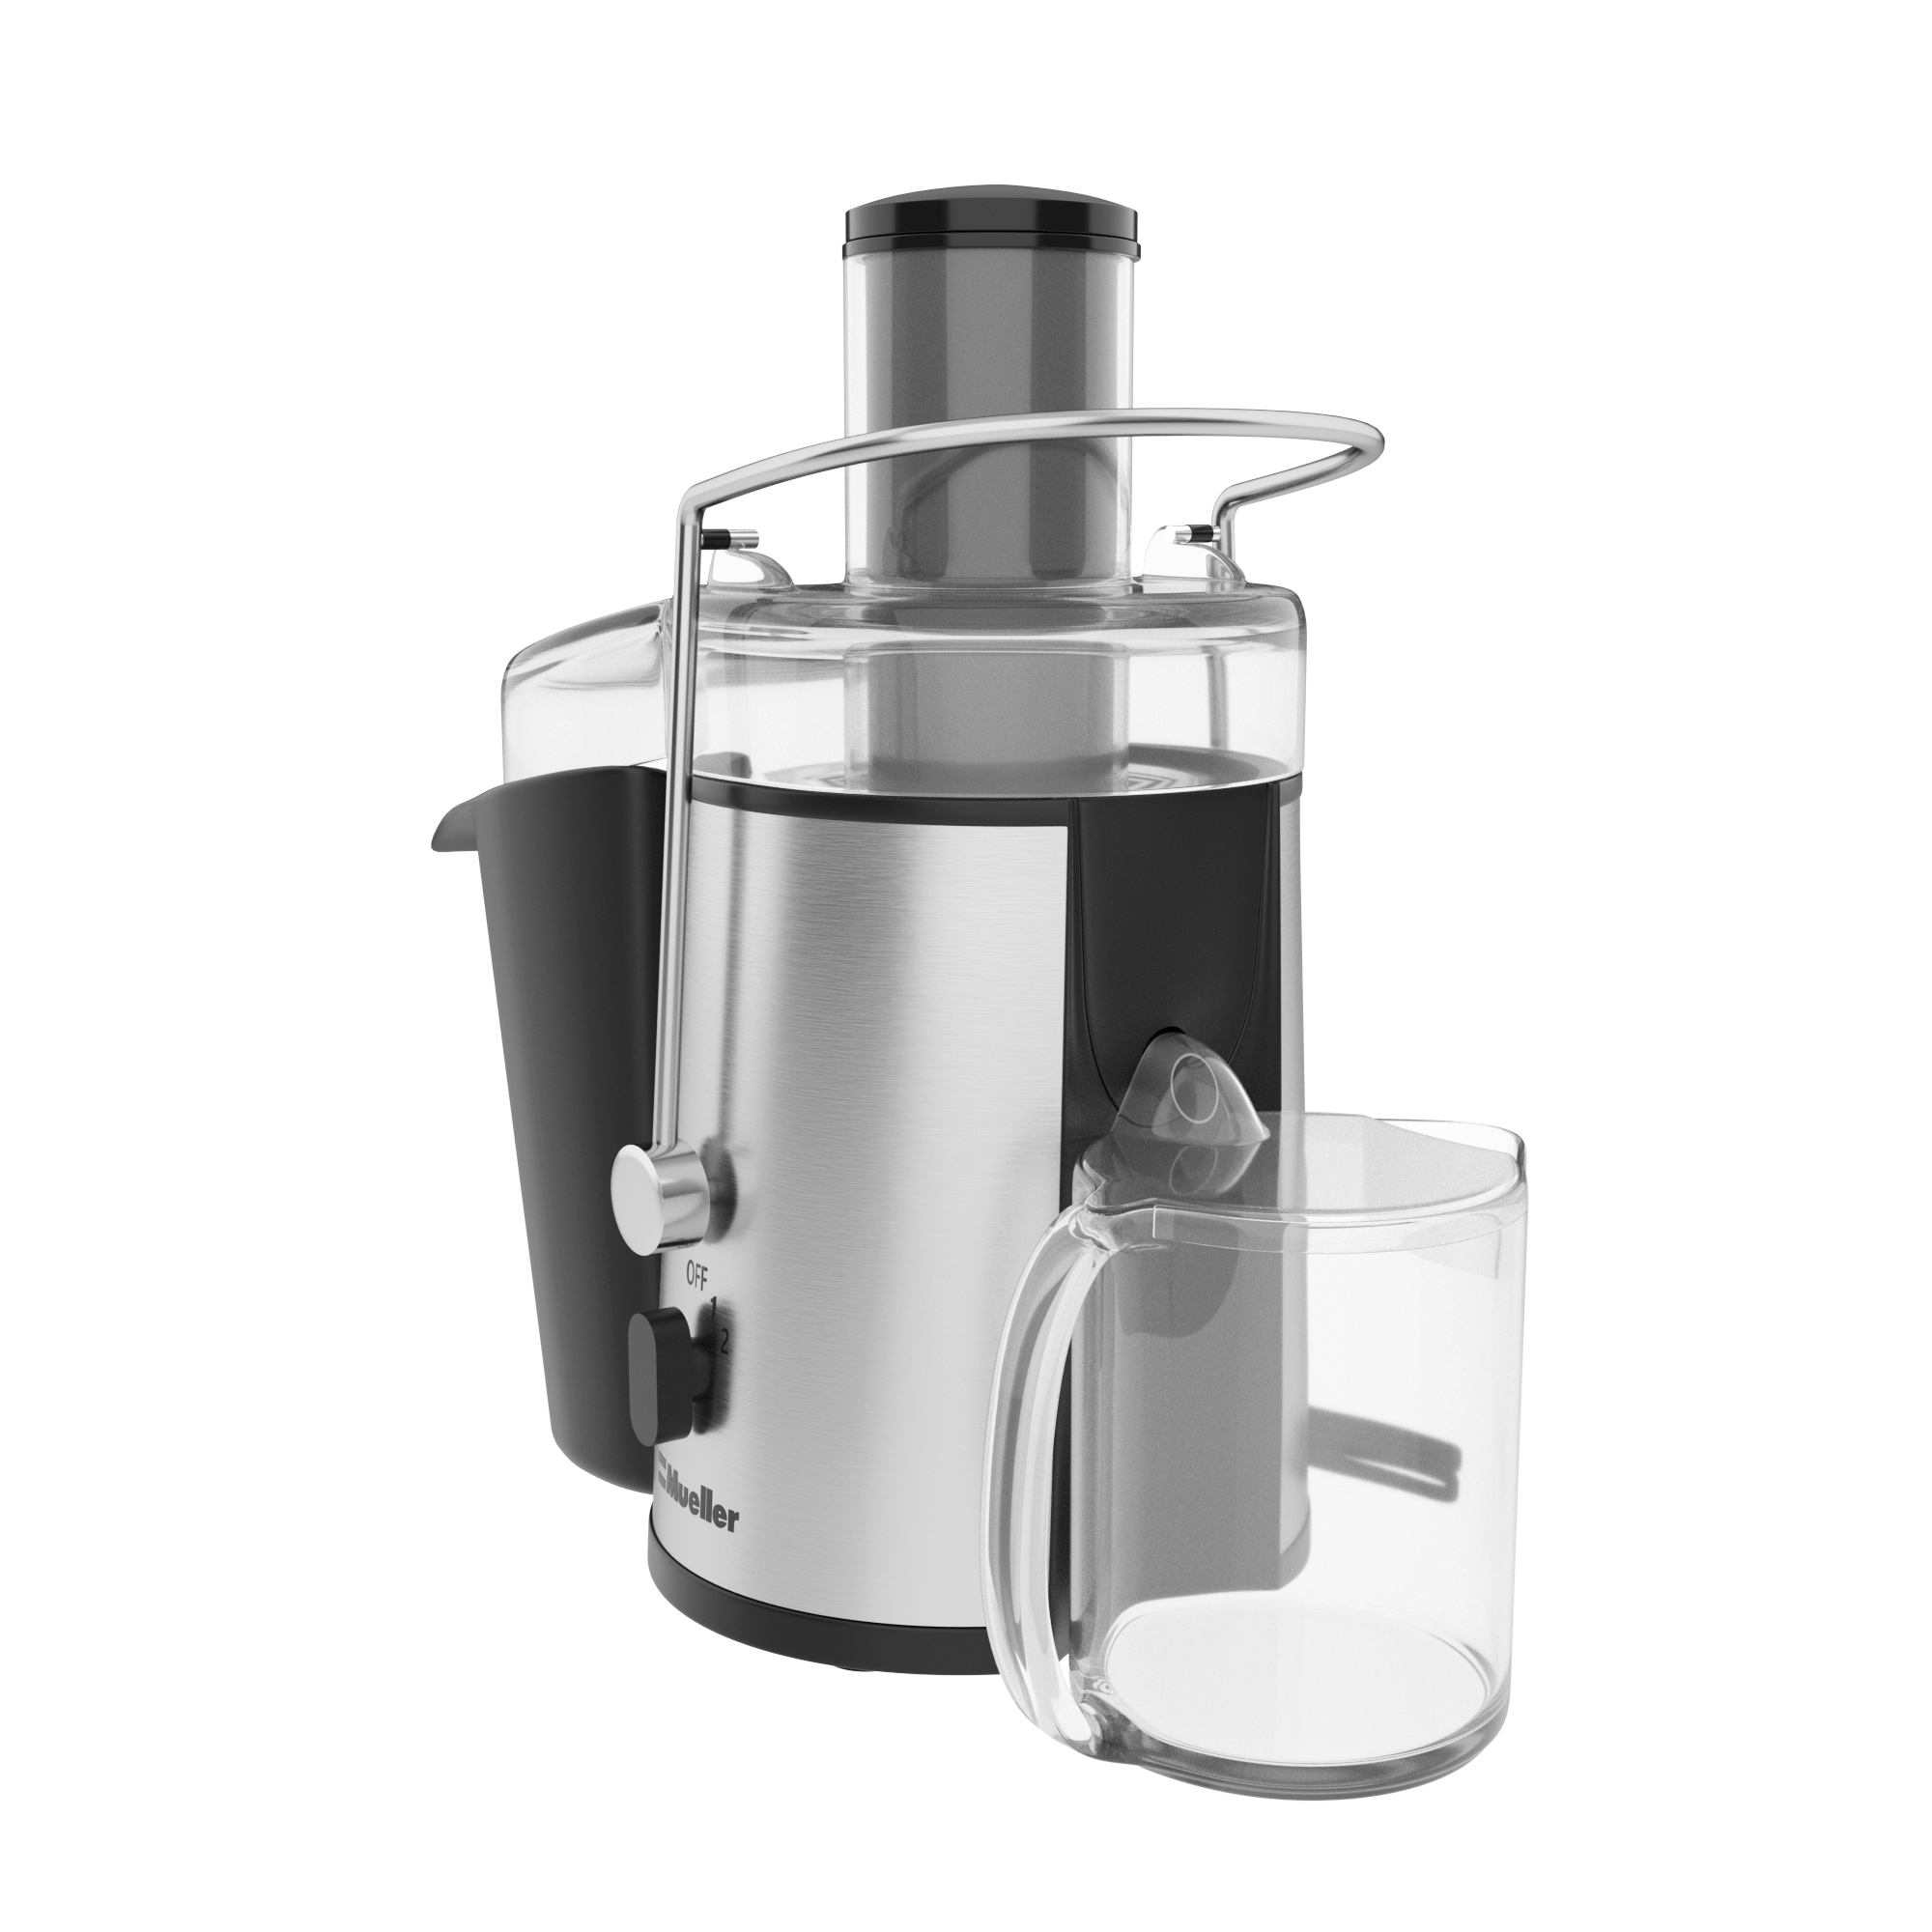 The Mueller juicer is reduced on  by 20% to $69.97 and has more than  28,000 five star reviews